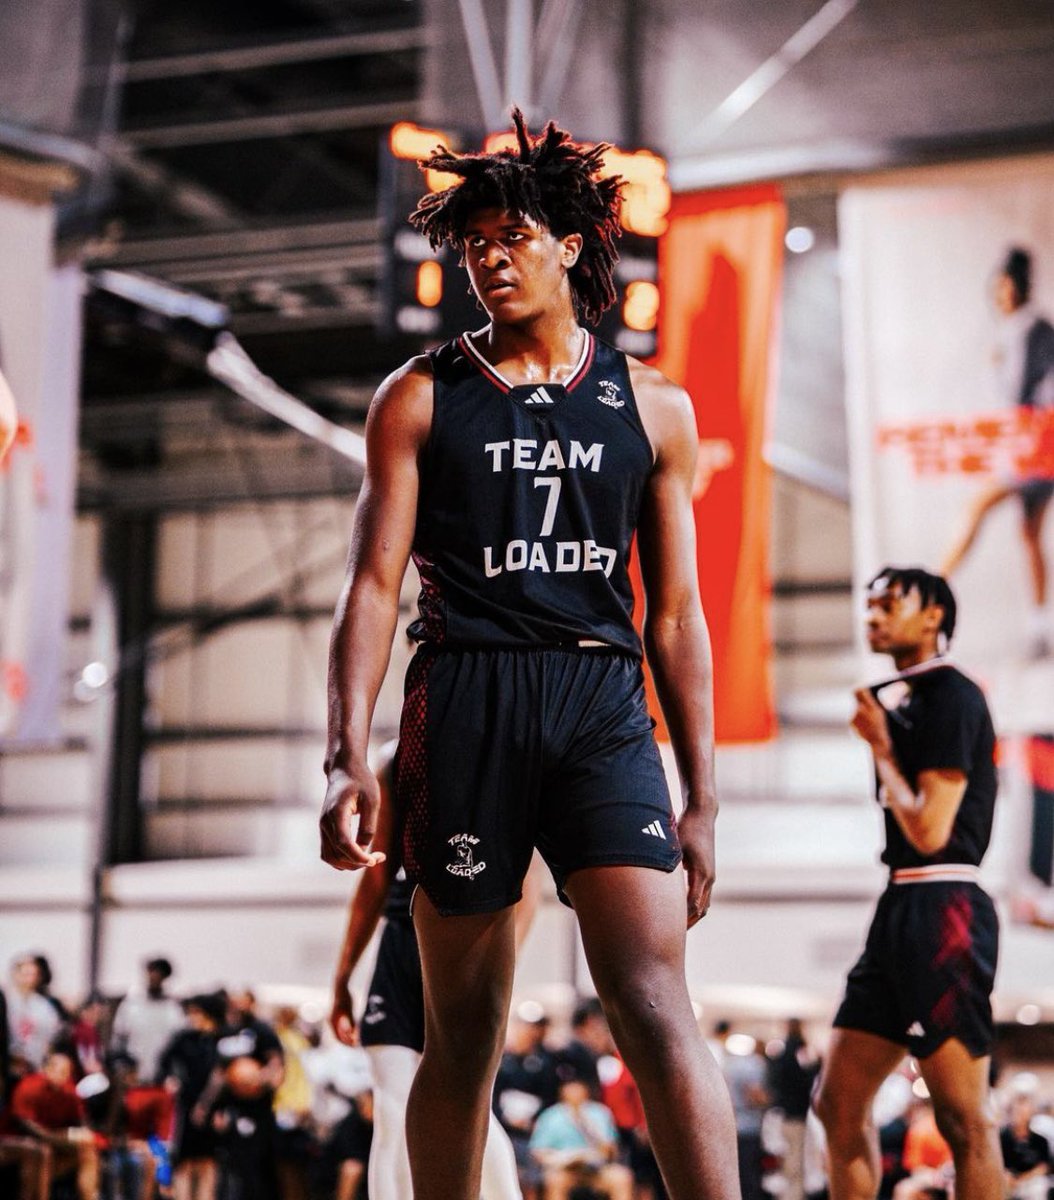 2024 5⭐️ Jayden Quaintance will take an official visit to Missouri beginning September 21st, a source tells me. Quaintance reclassified earlier this summer and is now ranked as one of the big men in the ‘24 class. #6 in the ‘24 class, per @On3sports.